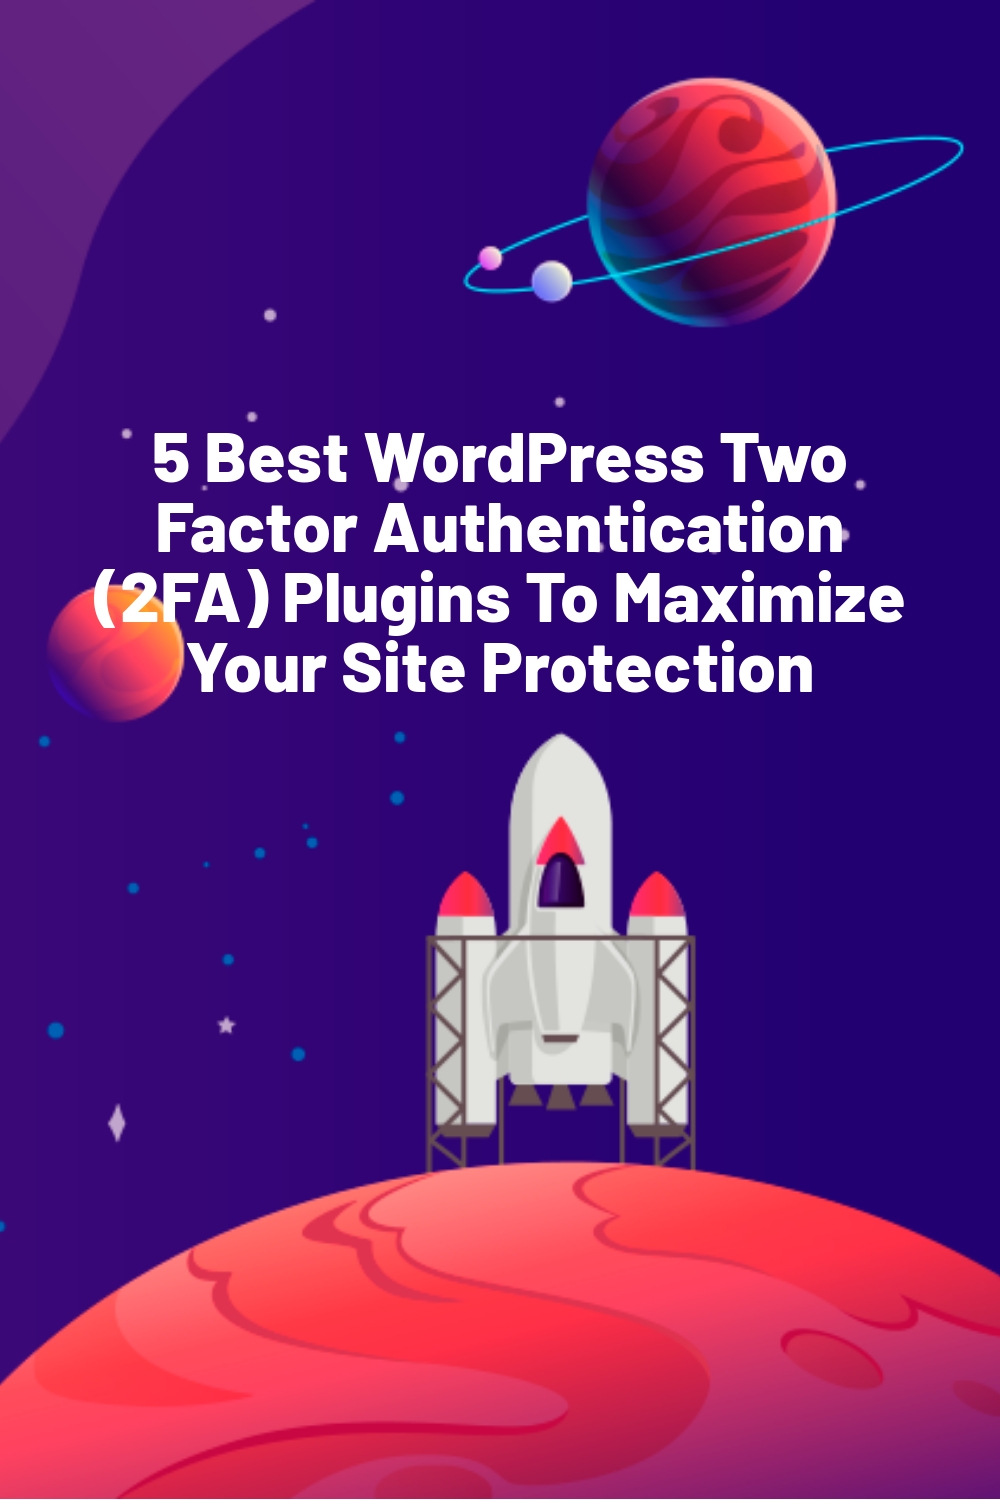 5 Best WordPress Two Factor Authentication (2FA) Plugins To Maximize Your Site Protection